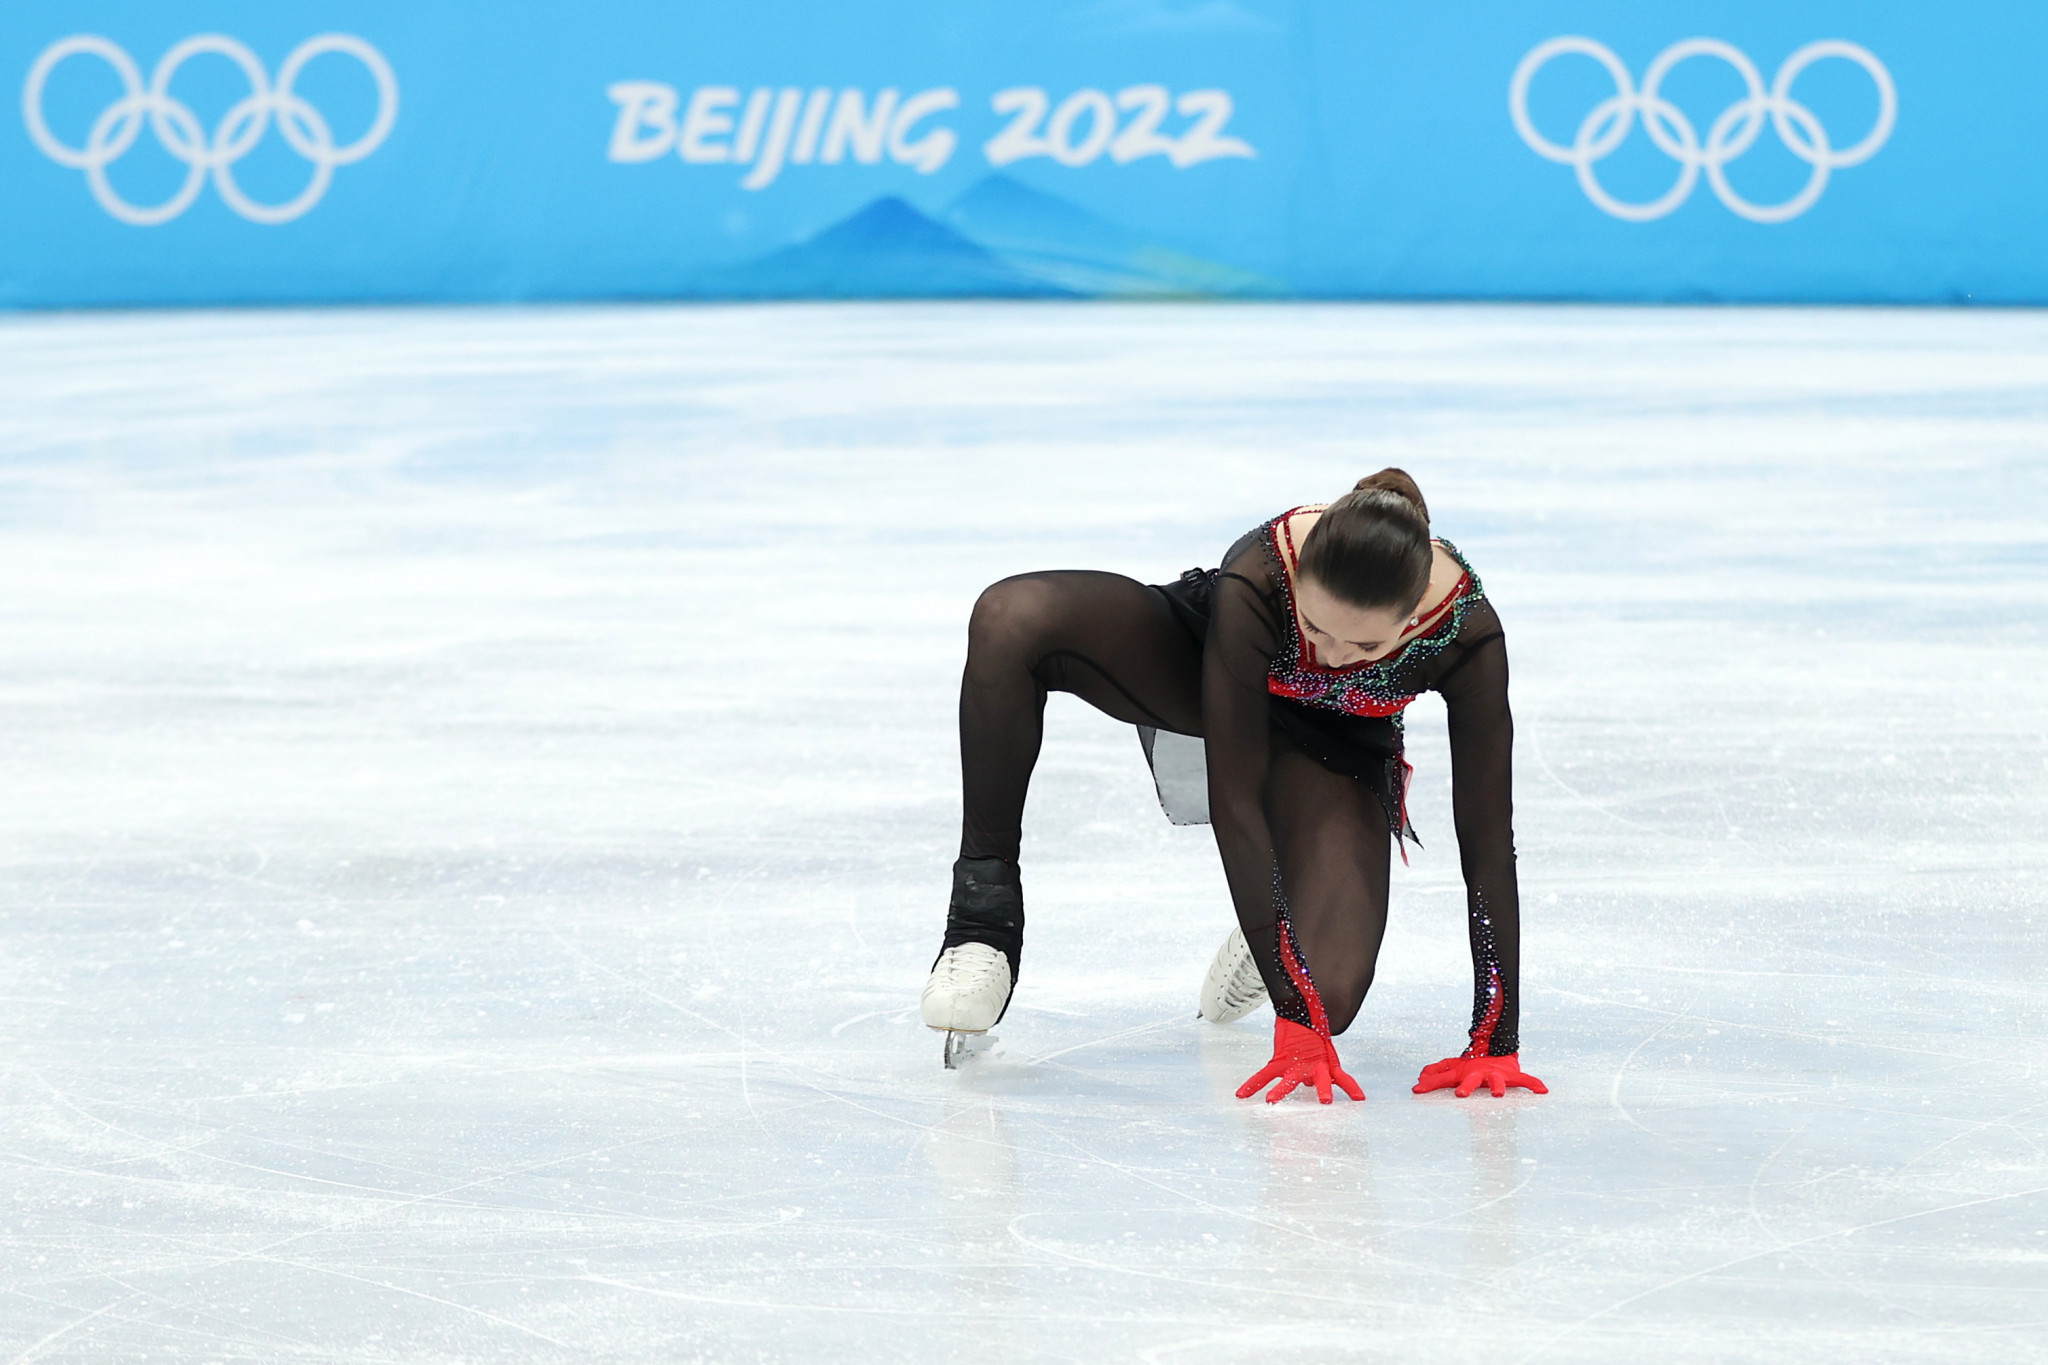 Kamila Valieva, who was 15 a Beijing 2022, would have been ineligible to compete under new minimum-age rules proposed for figure skating ©Getty Images